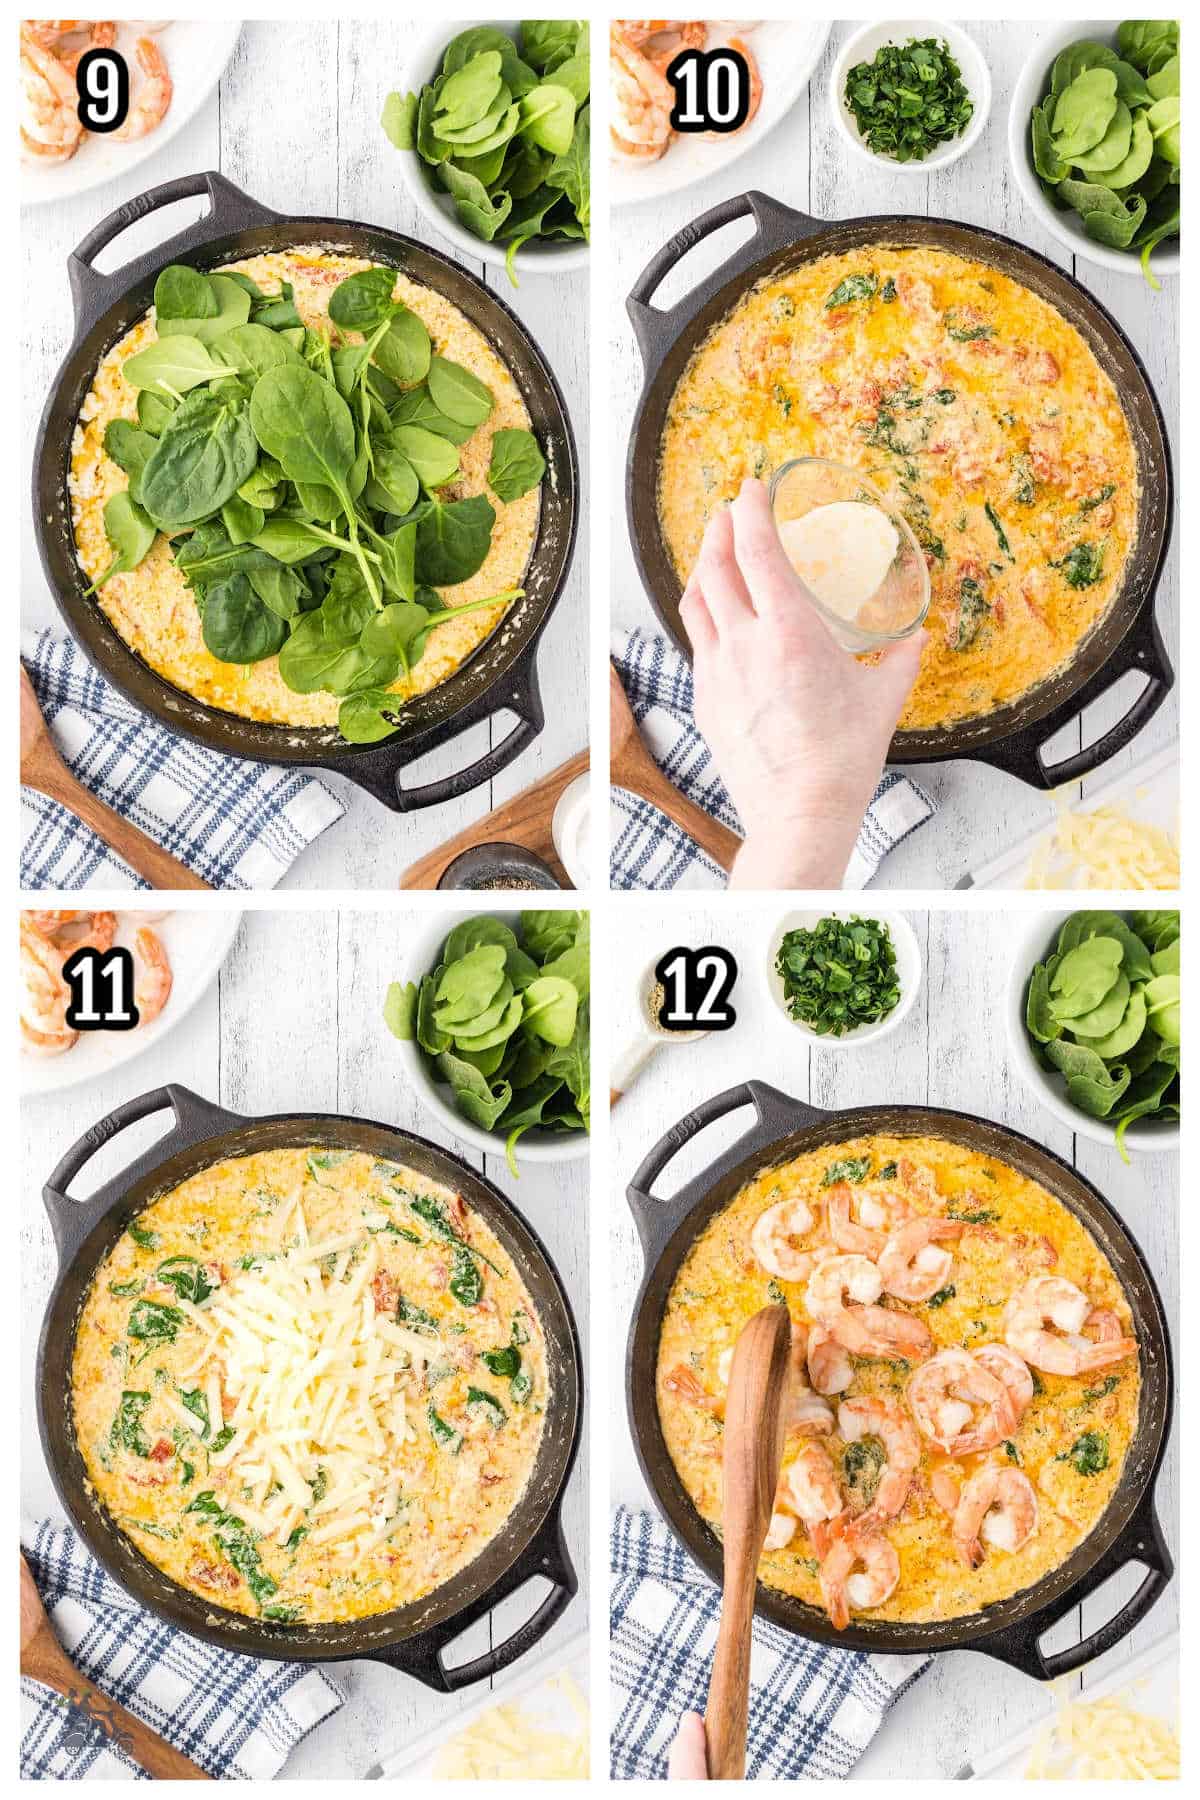 The third collage steps nine through twelve, is used to make the One-Pan skillet in Tuscan Style. 